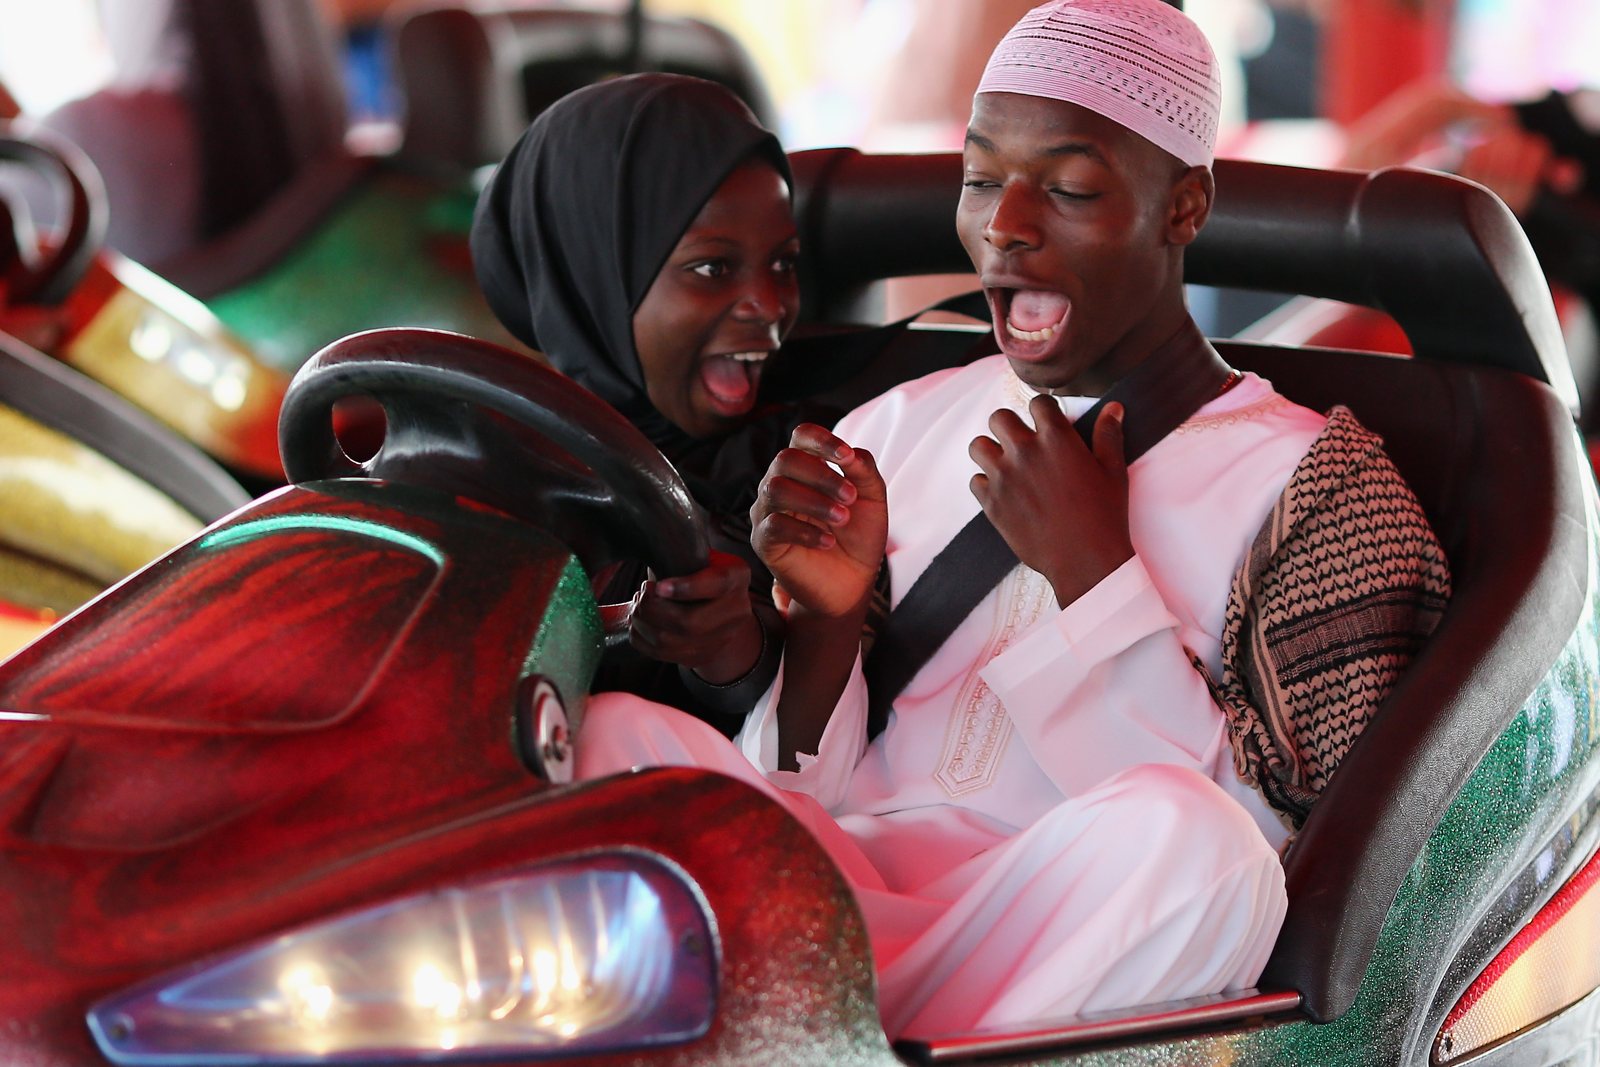 Visitors at an amusement park in London during an Eid celebration, July 2014